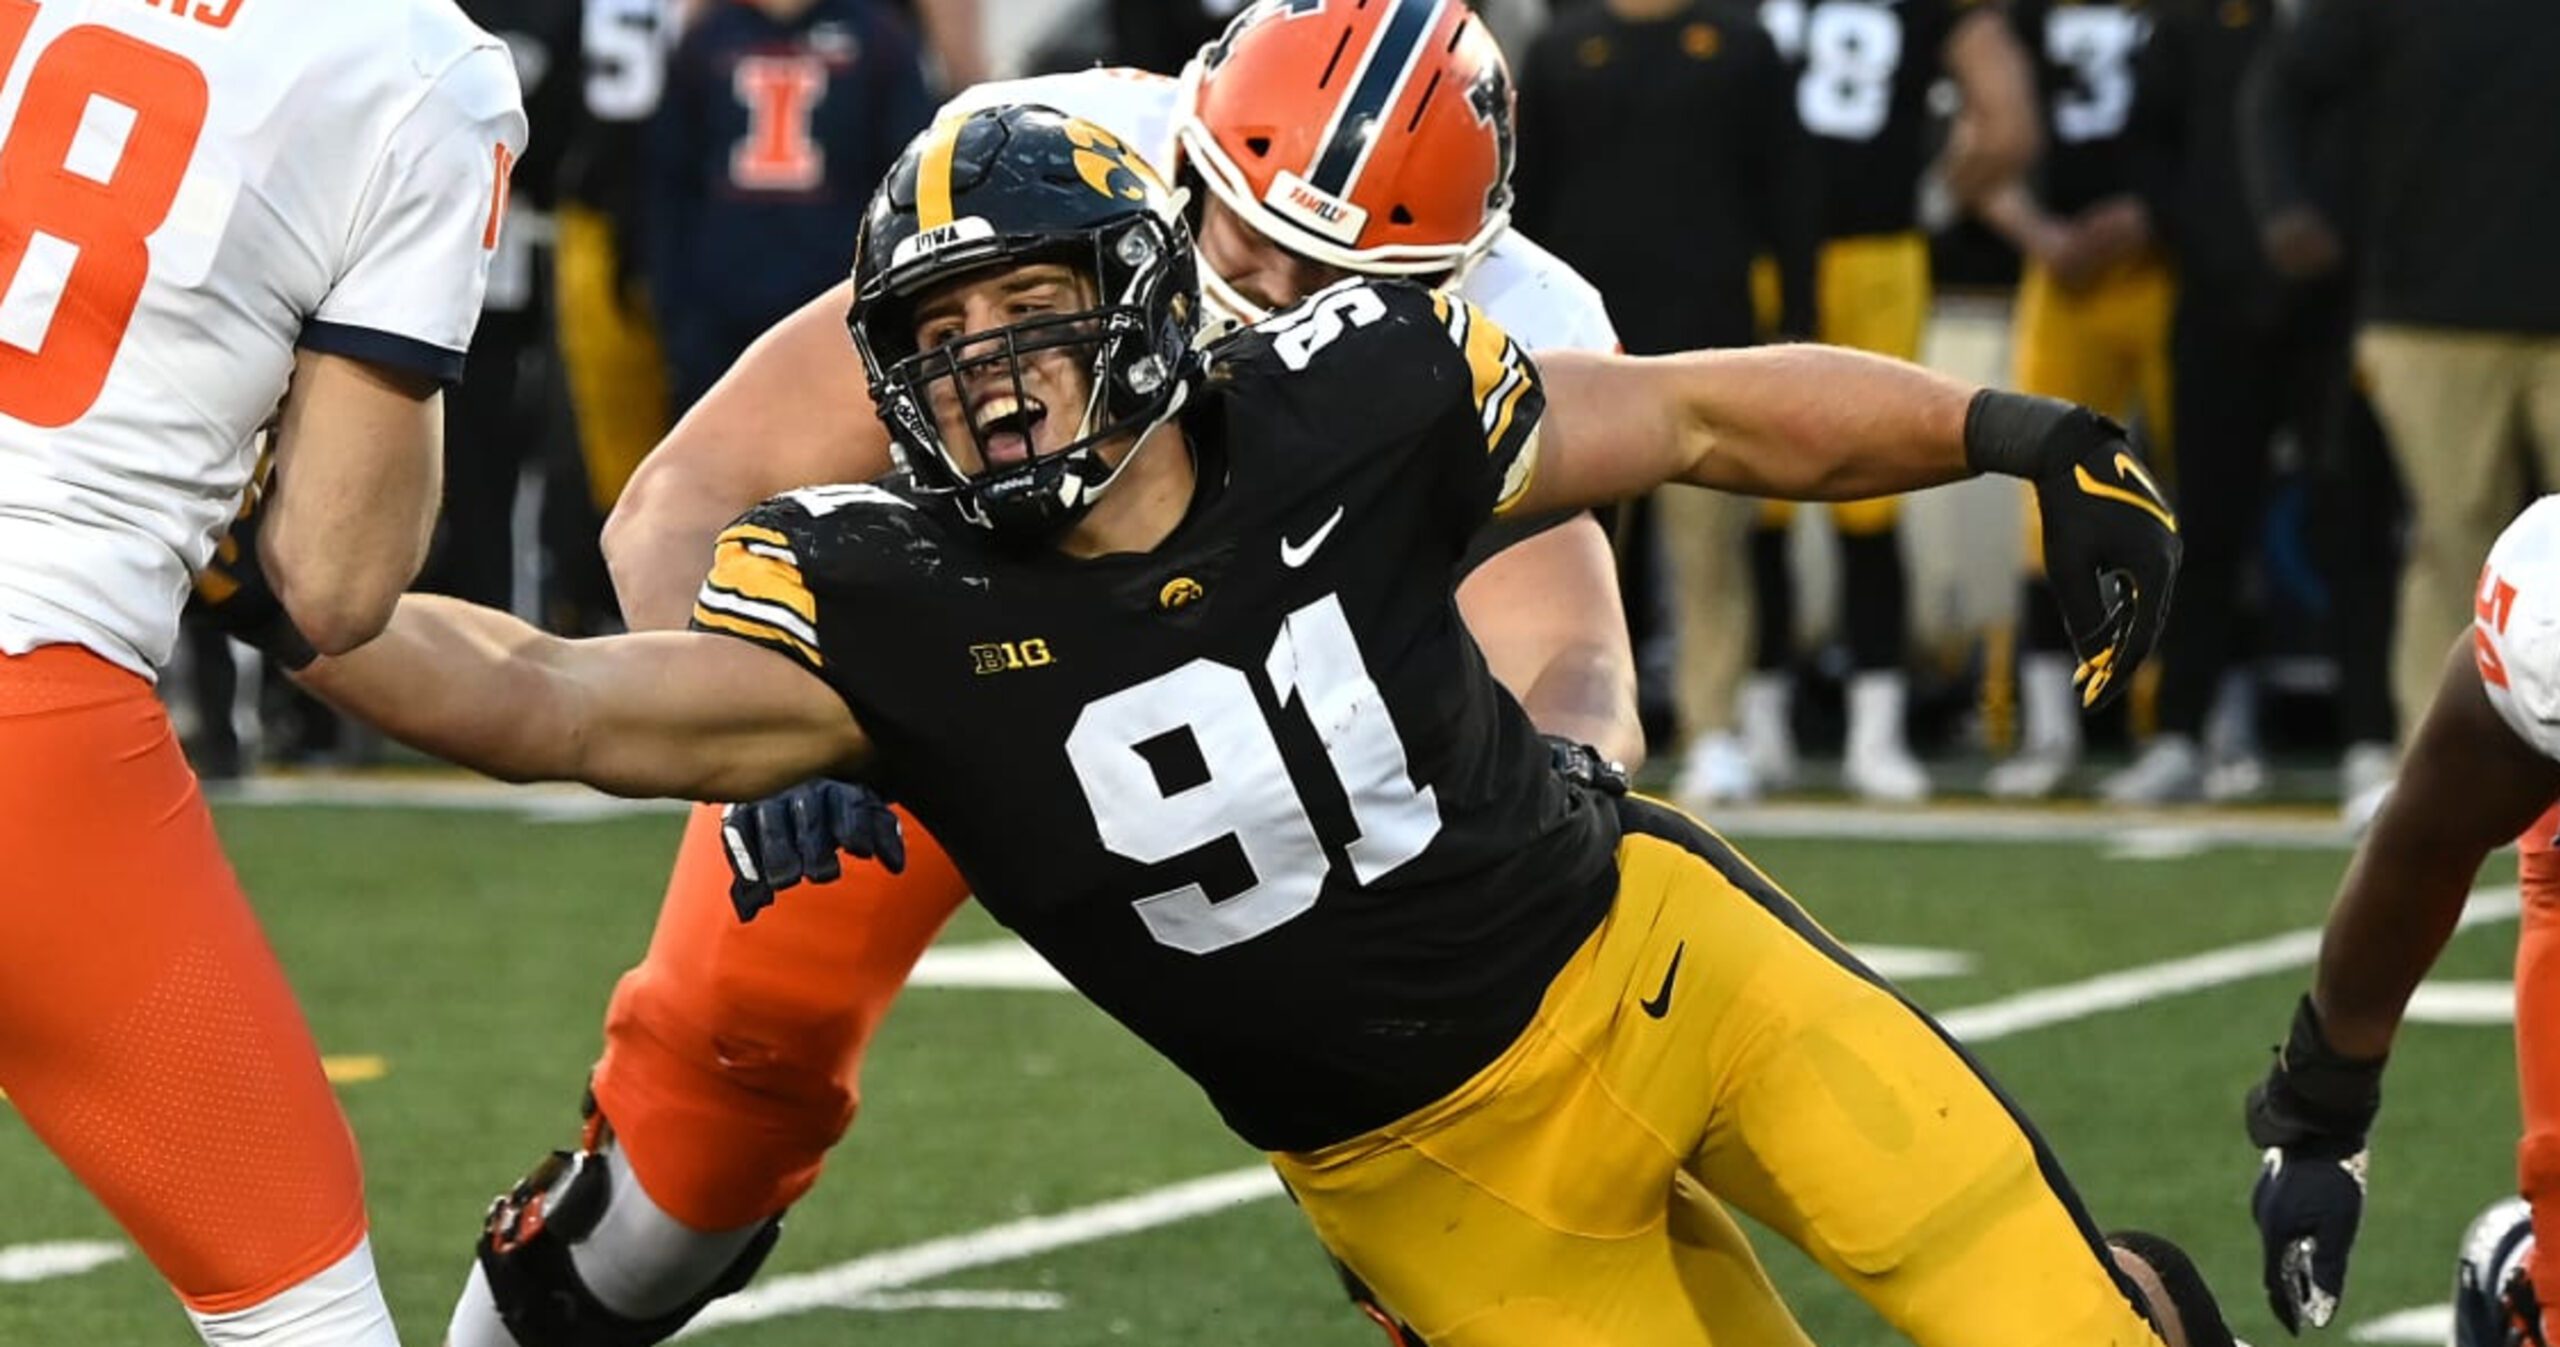 Iowa edge rusher Lukas Van Ness is seen as a first-round pick in the 2023 NFL Draft. We break down the skillset he brings to the table here.